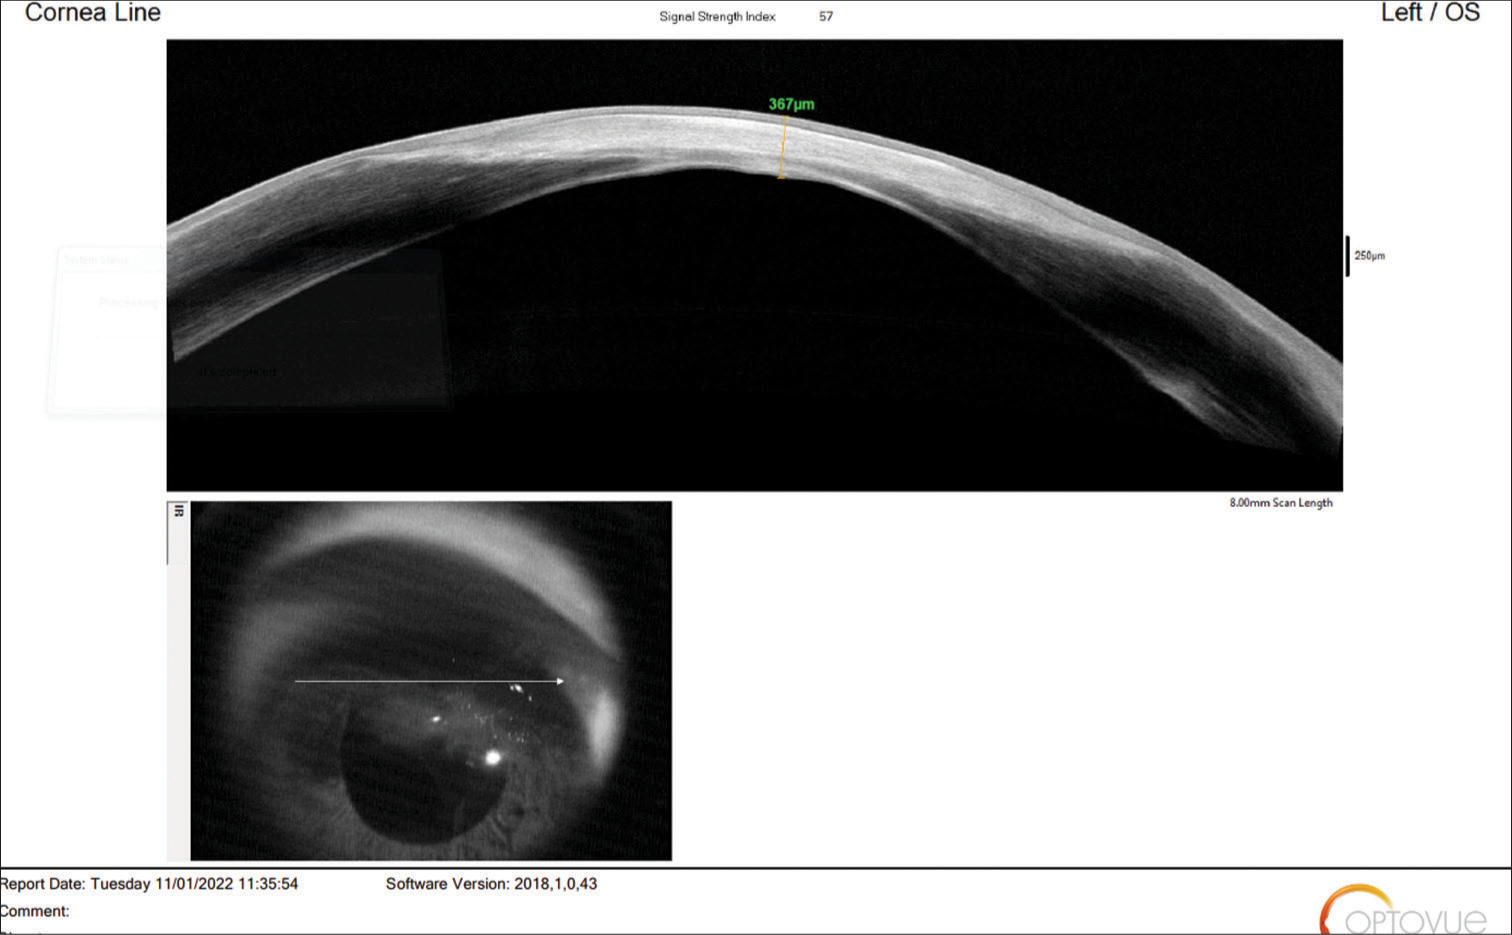 AS-OCT - Anterior segment optical coherence tomography (Optovue, Fremont, CA) image showing fine integration of tenons patch graft in the cornea.